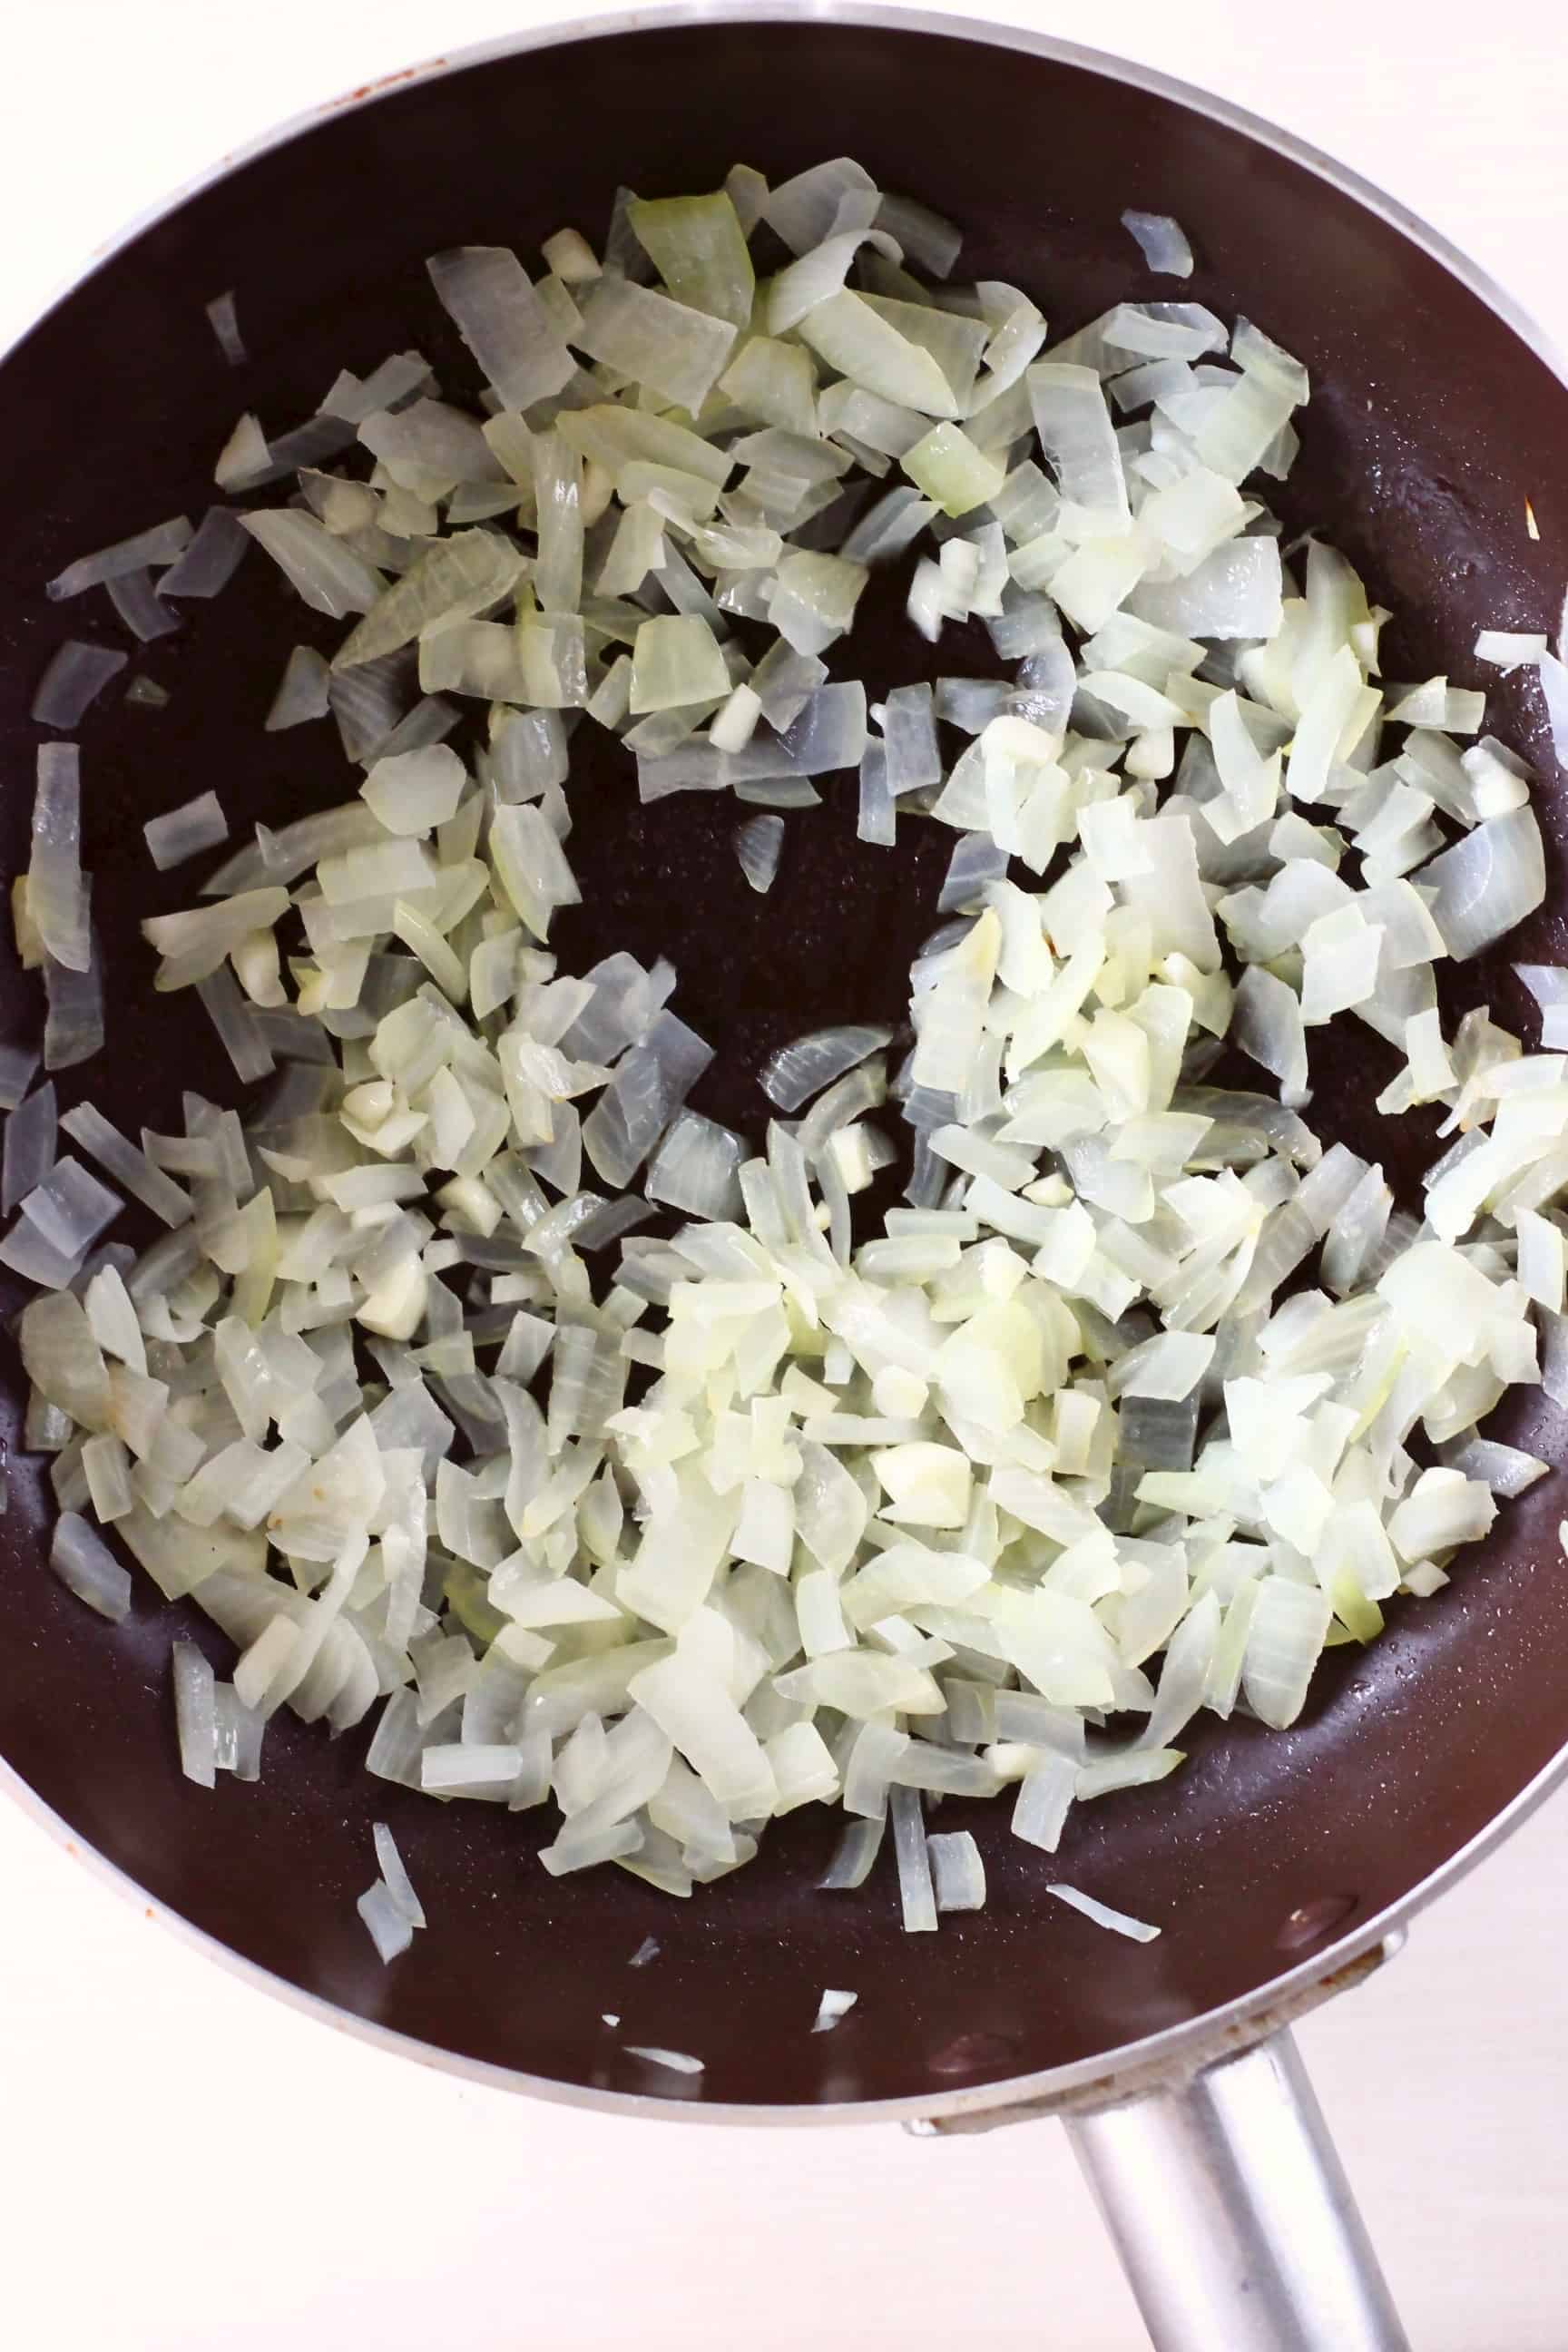 Diced onion being fried in a black frying pan against a white background